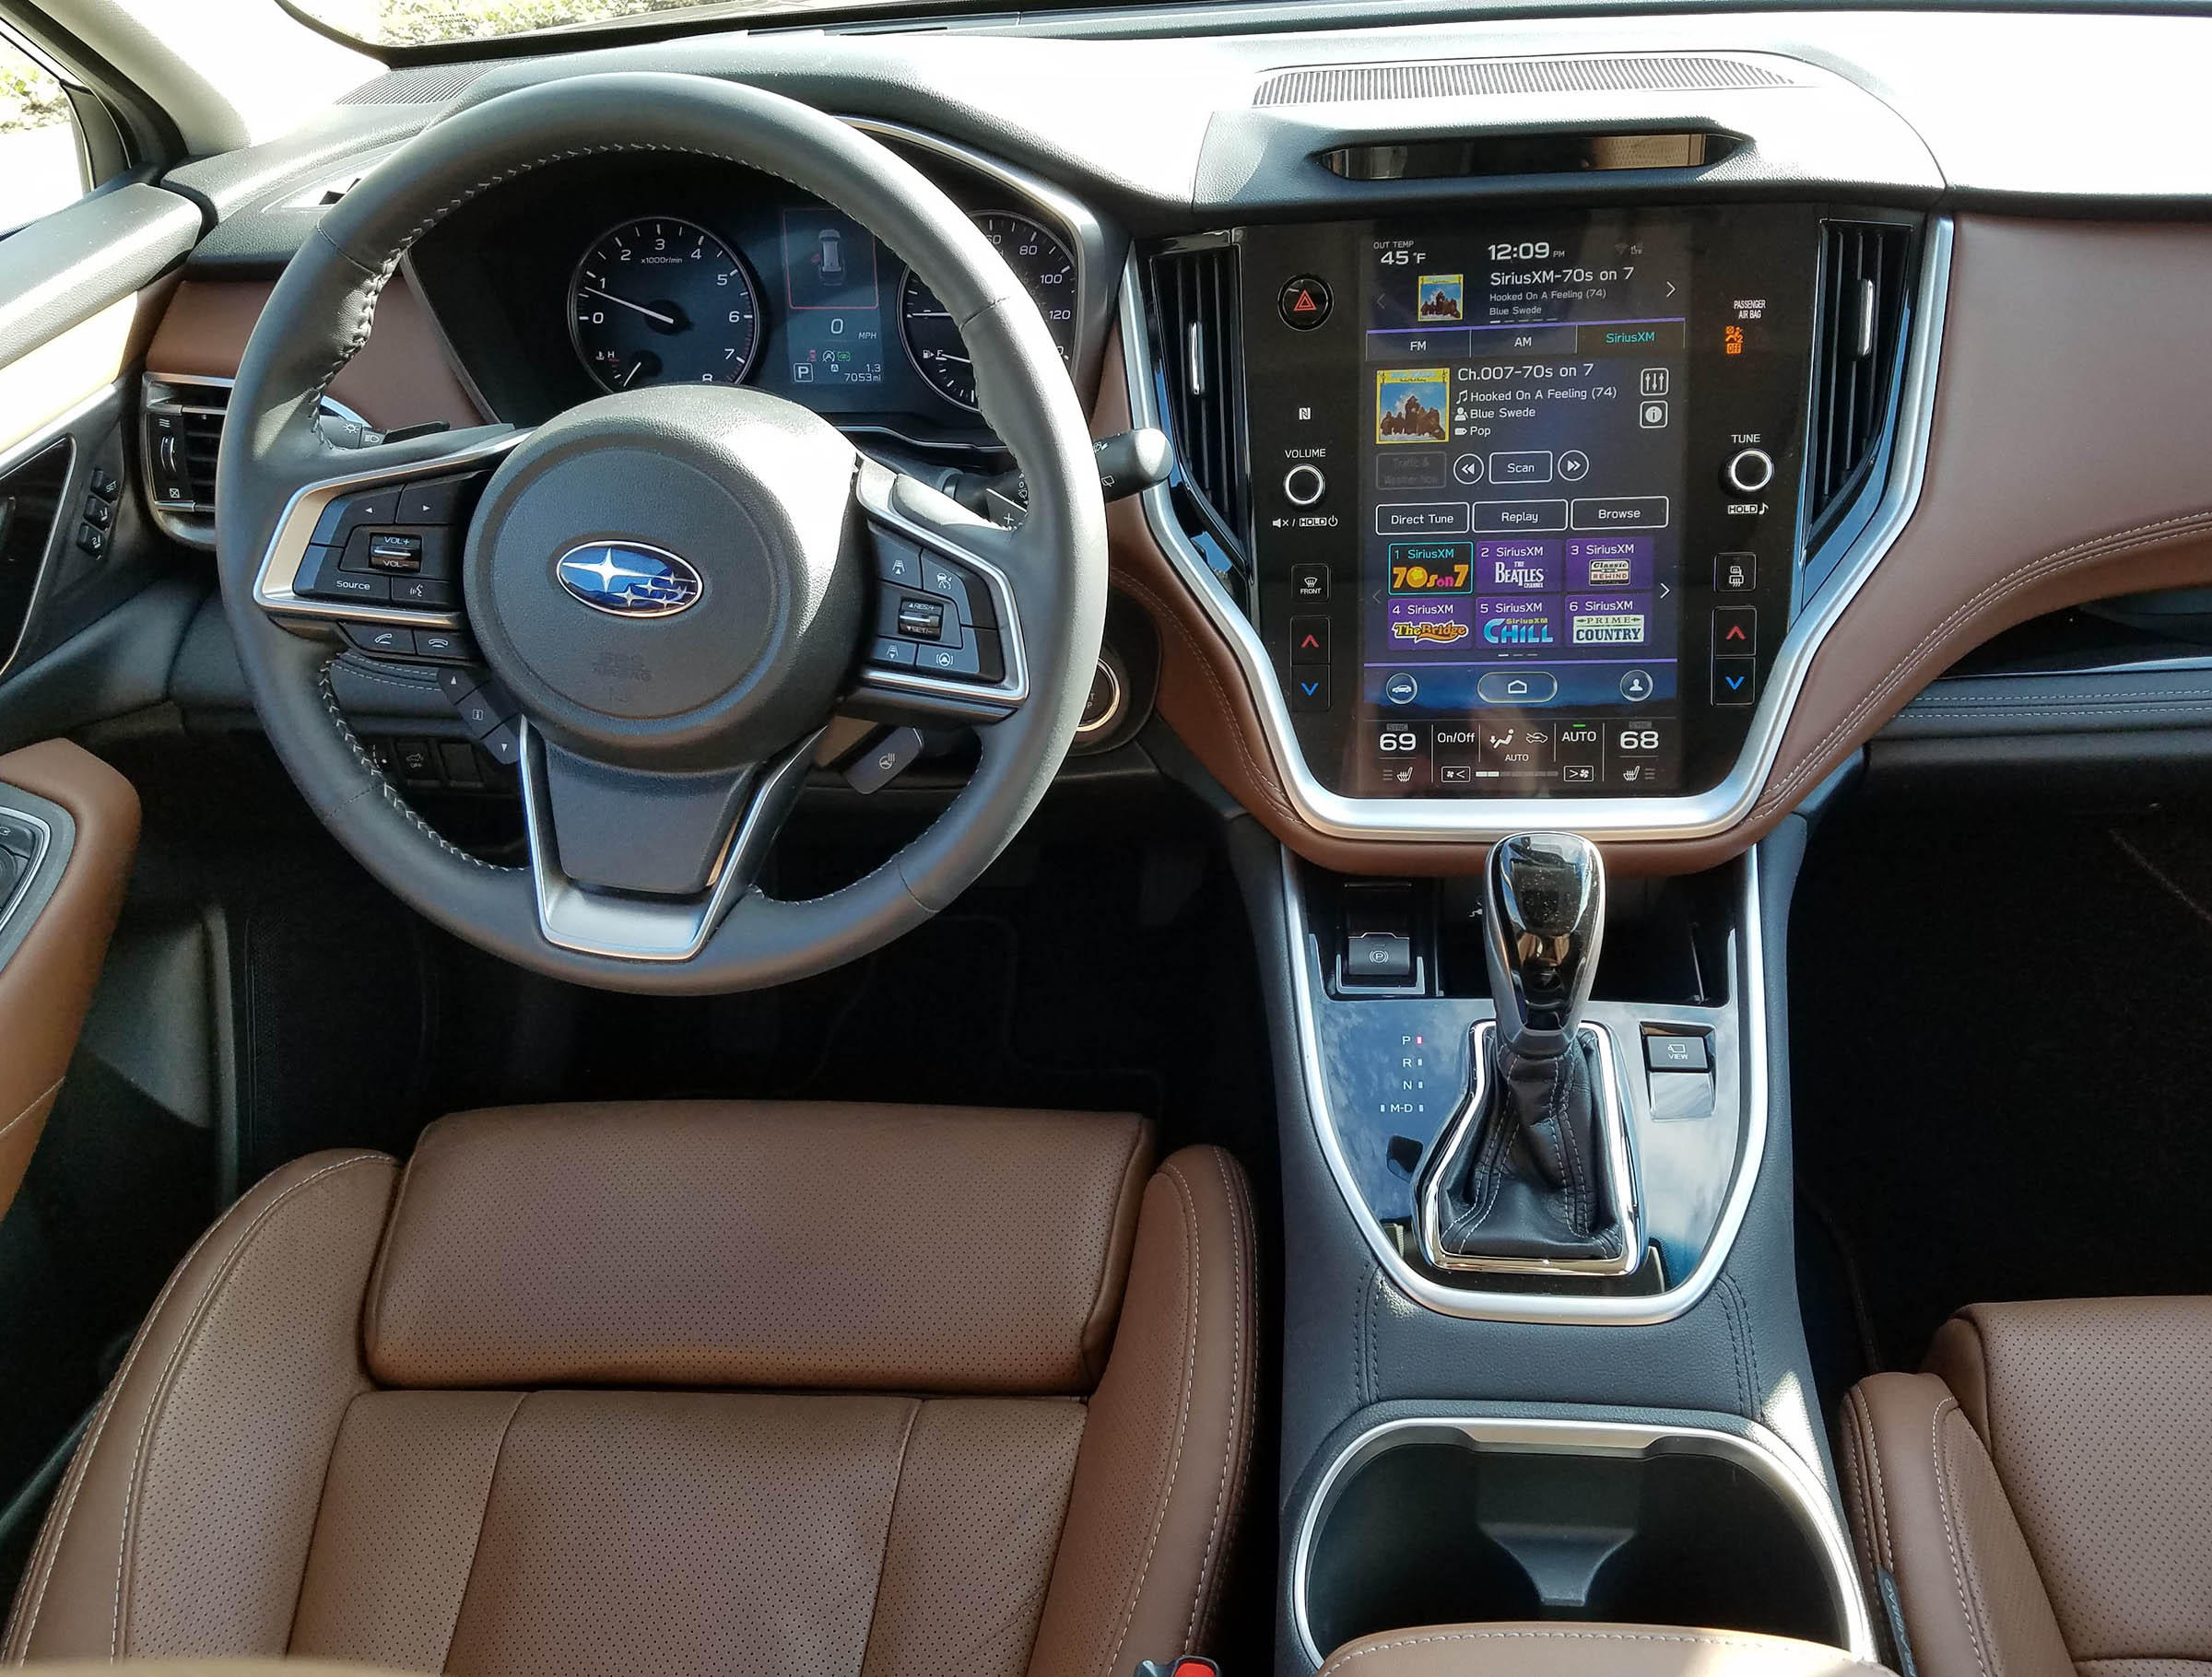 2020 Subaru Outback Touring Xt Interior Cars Trend Today